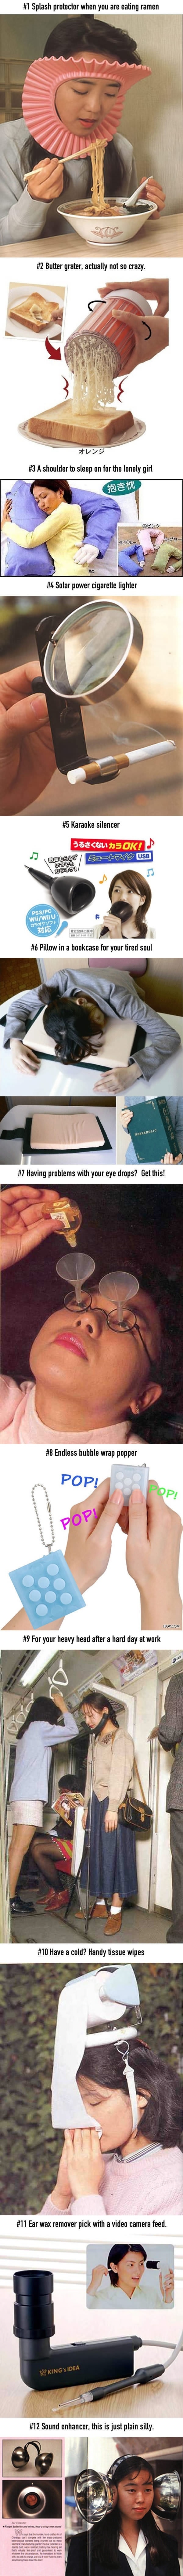 Some crazy Japanese inventions